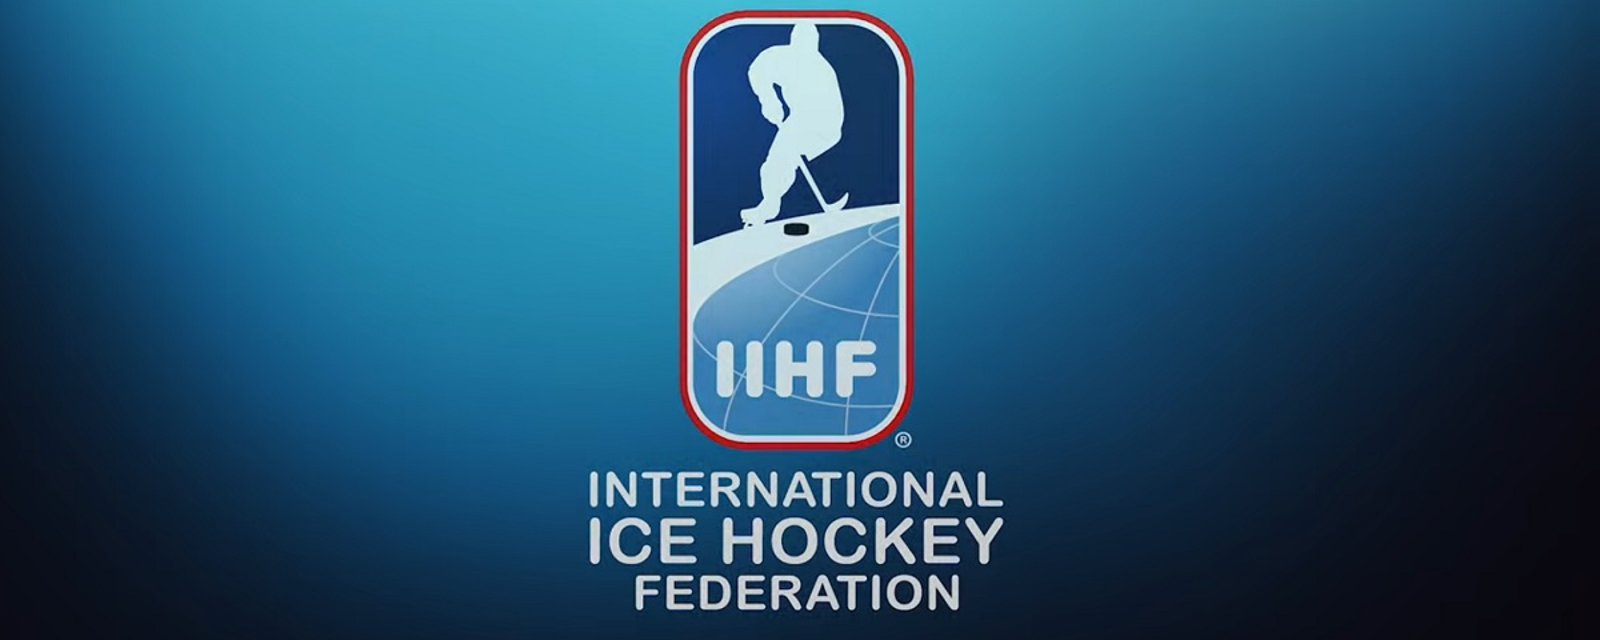 IIHF introduces controversial new rule ahead of World Juniors.